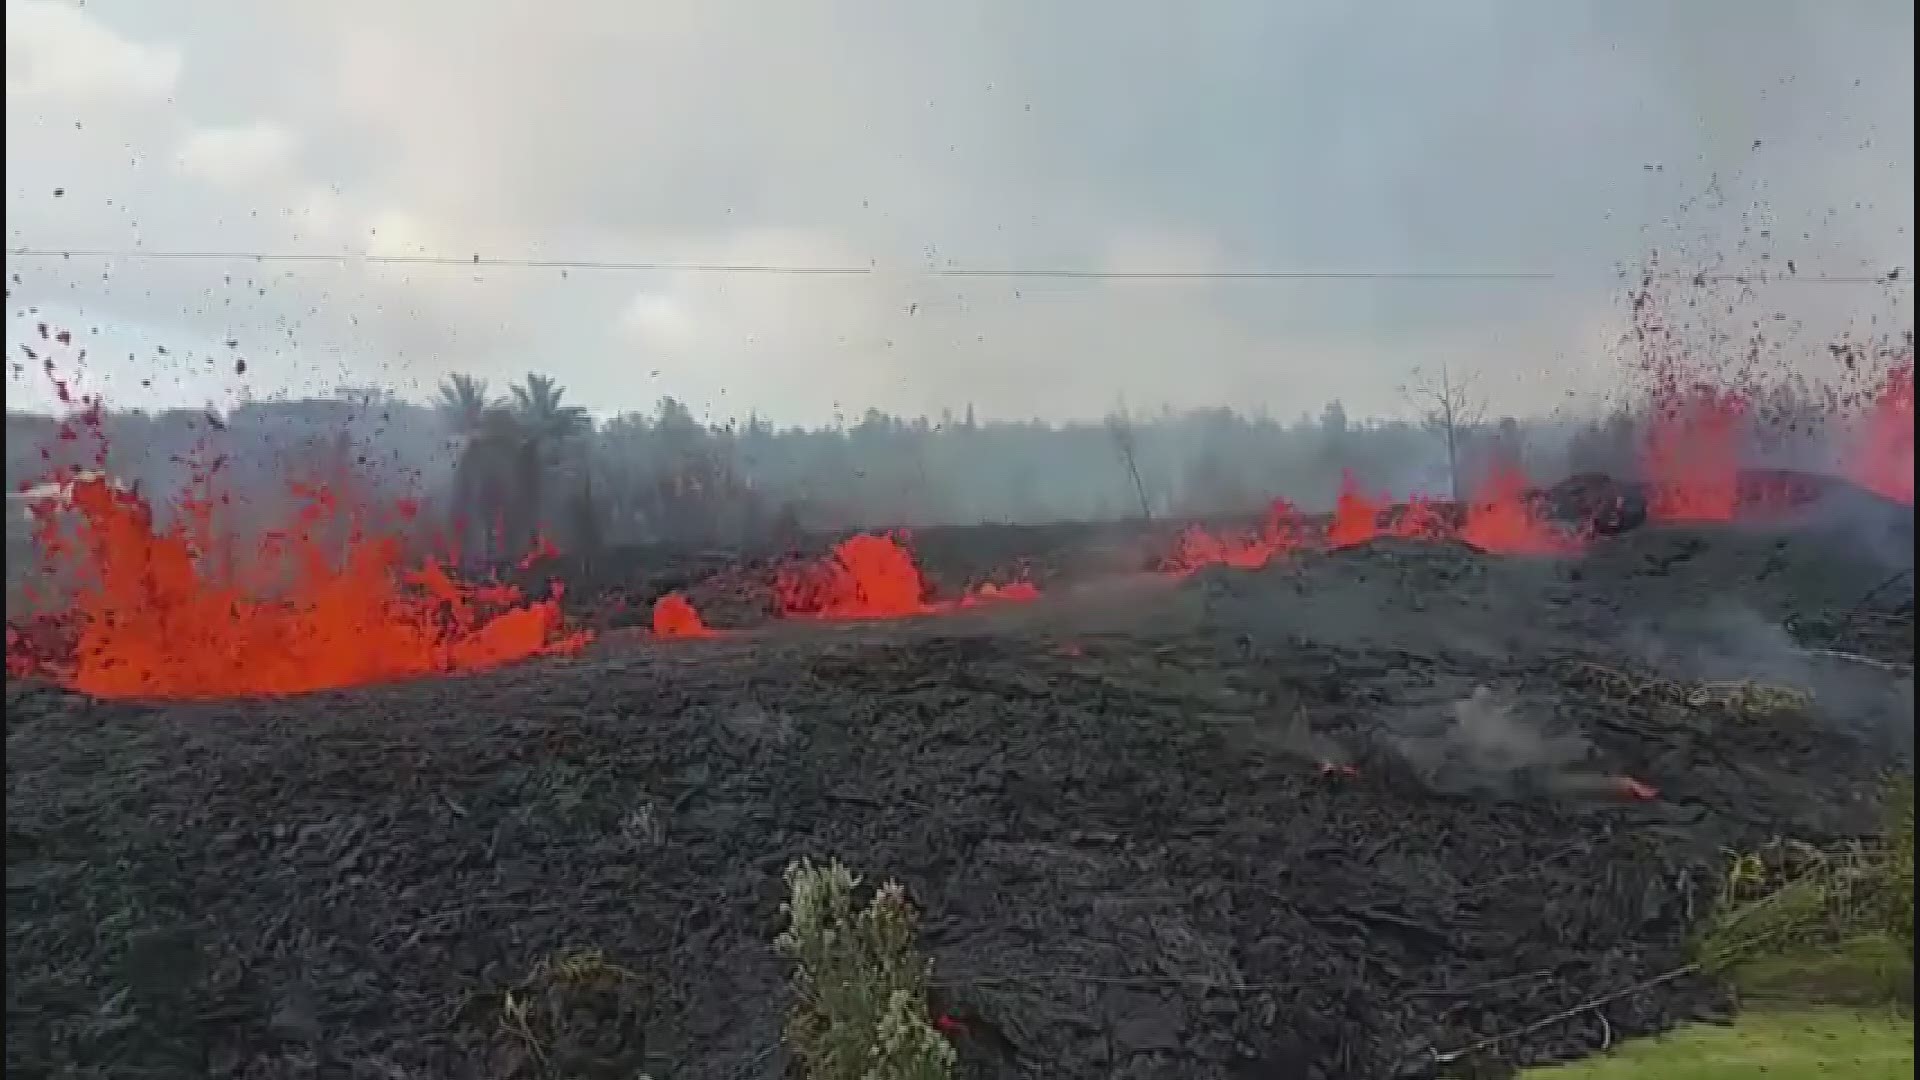 Vancouver native Travis Sanders shot this video from the roof of a home as the lava flow from Kilauea approached Leilani Estates on Hawaii's Big Island